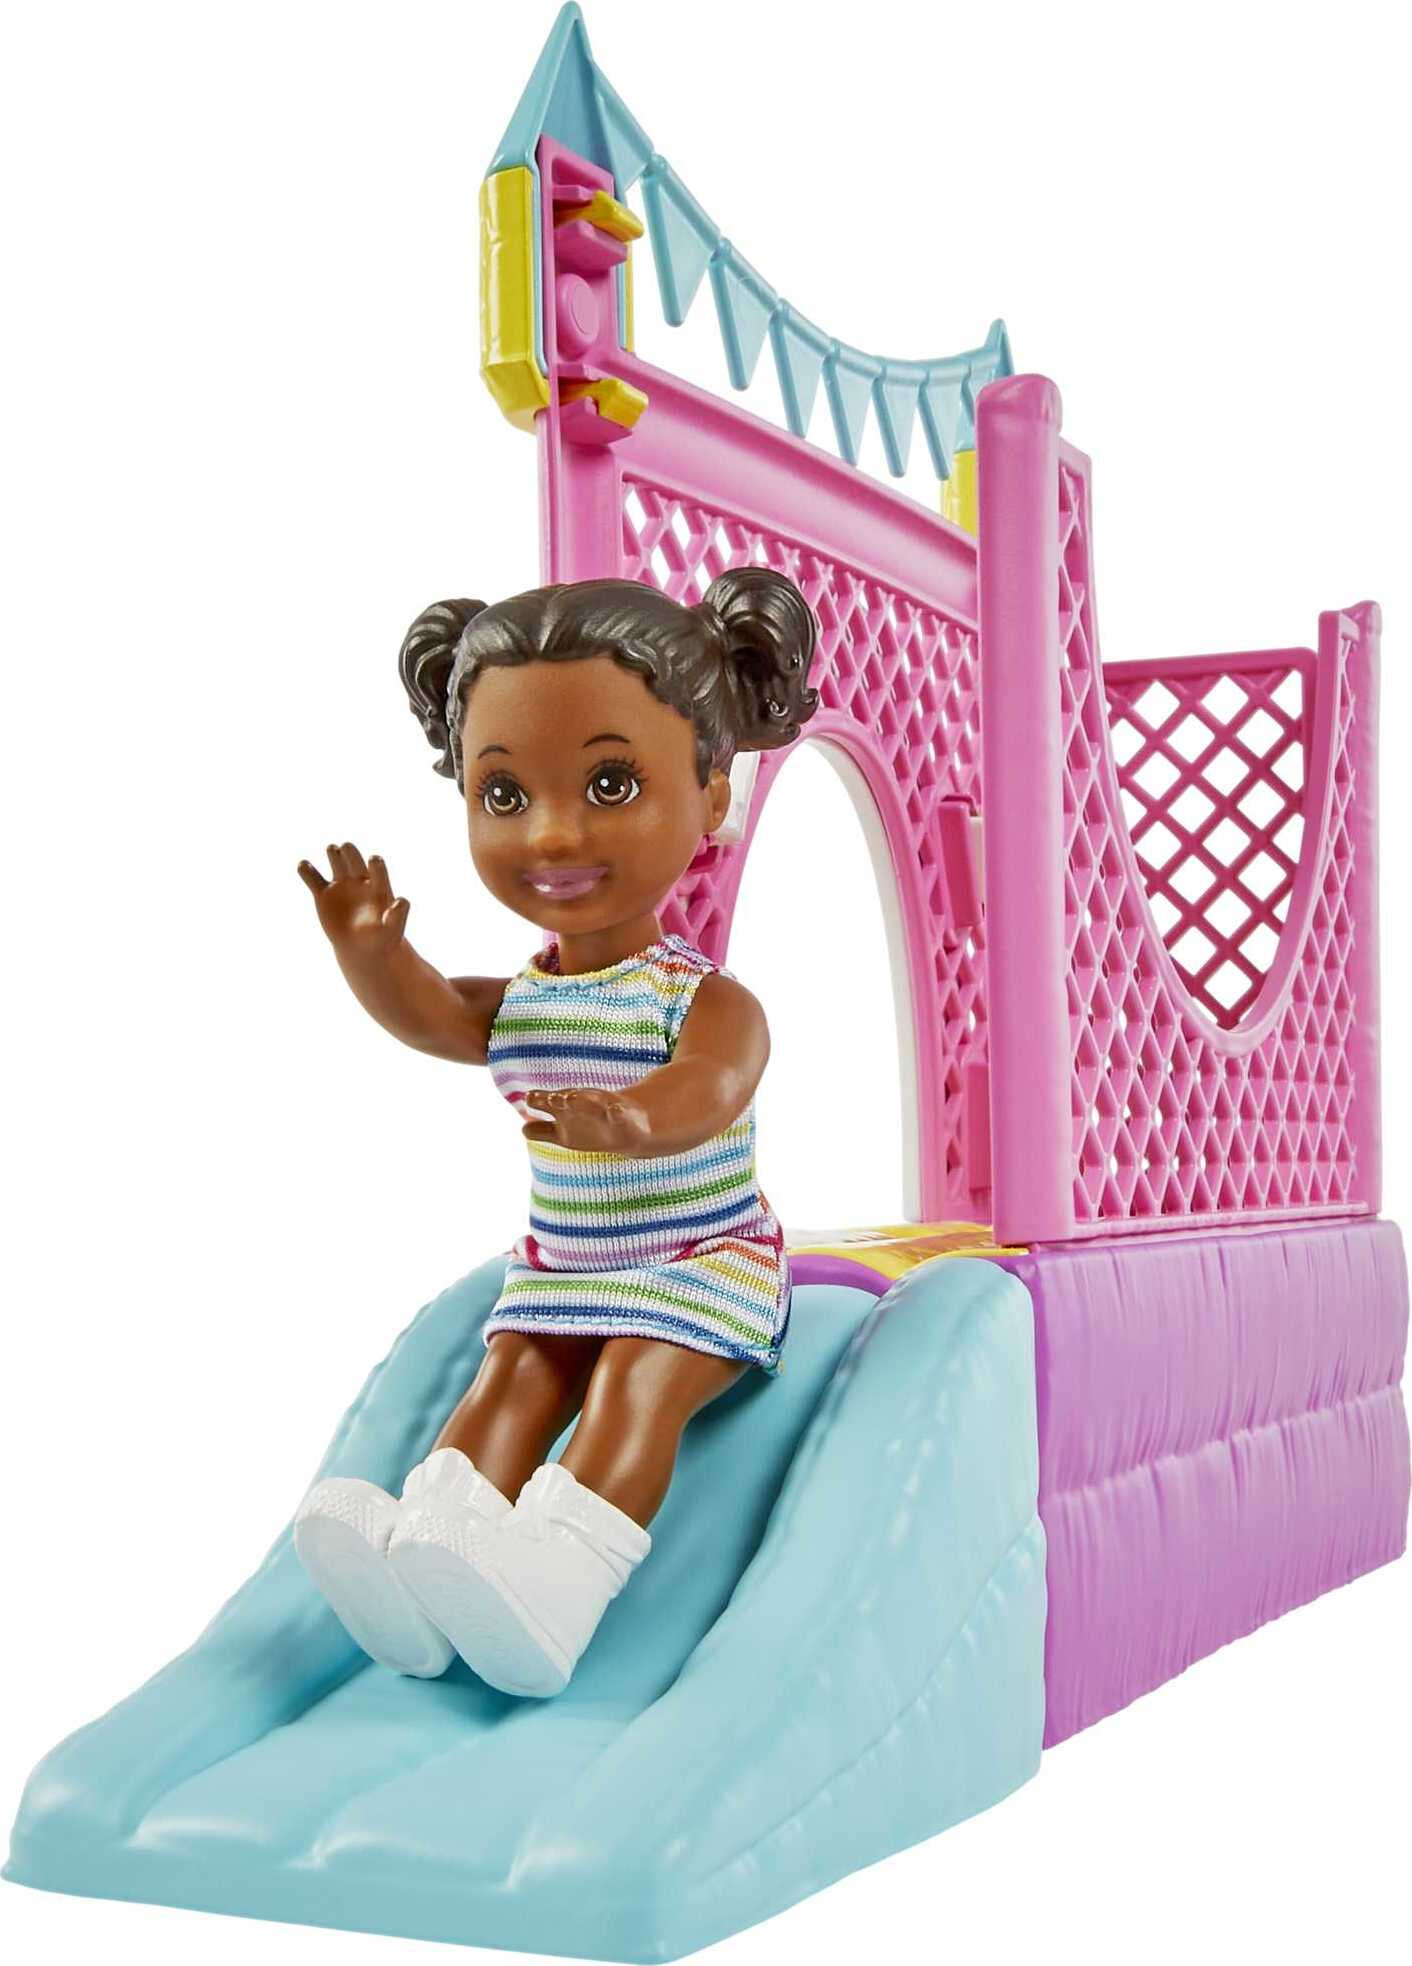 Barbie Skipper Babysitters Inc Bounce House Playset, Skipper Doll, Toddler Small Doll & Accessories - image 4 of 7